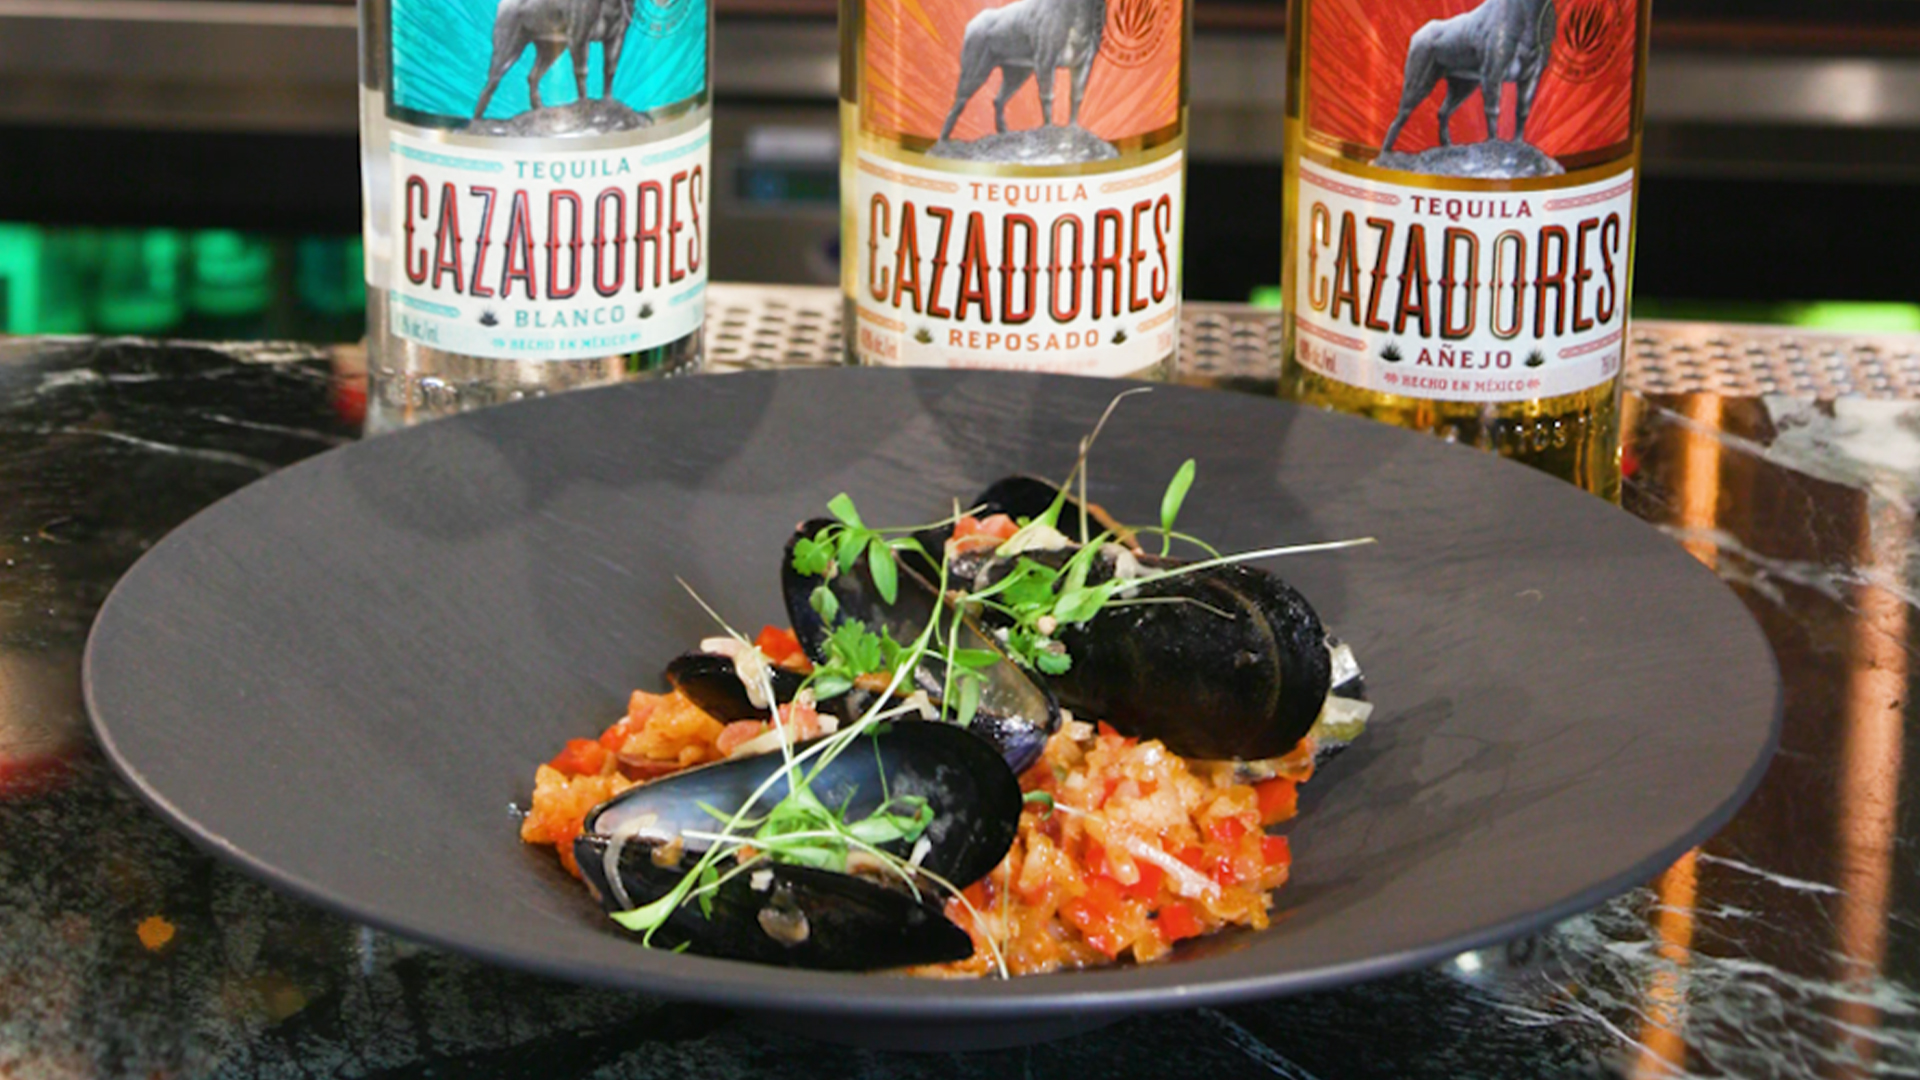 Steamed mussels with Cazadores blanco-lime-butter sauce